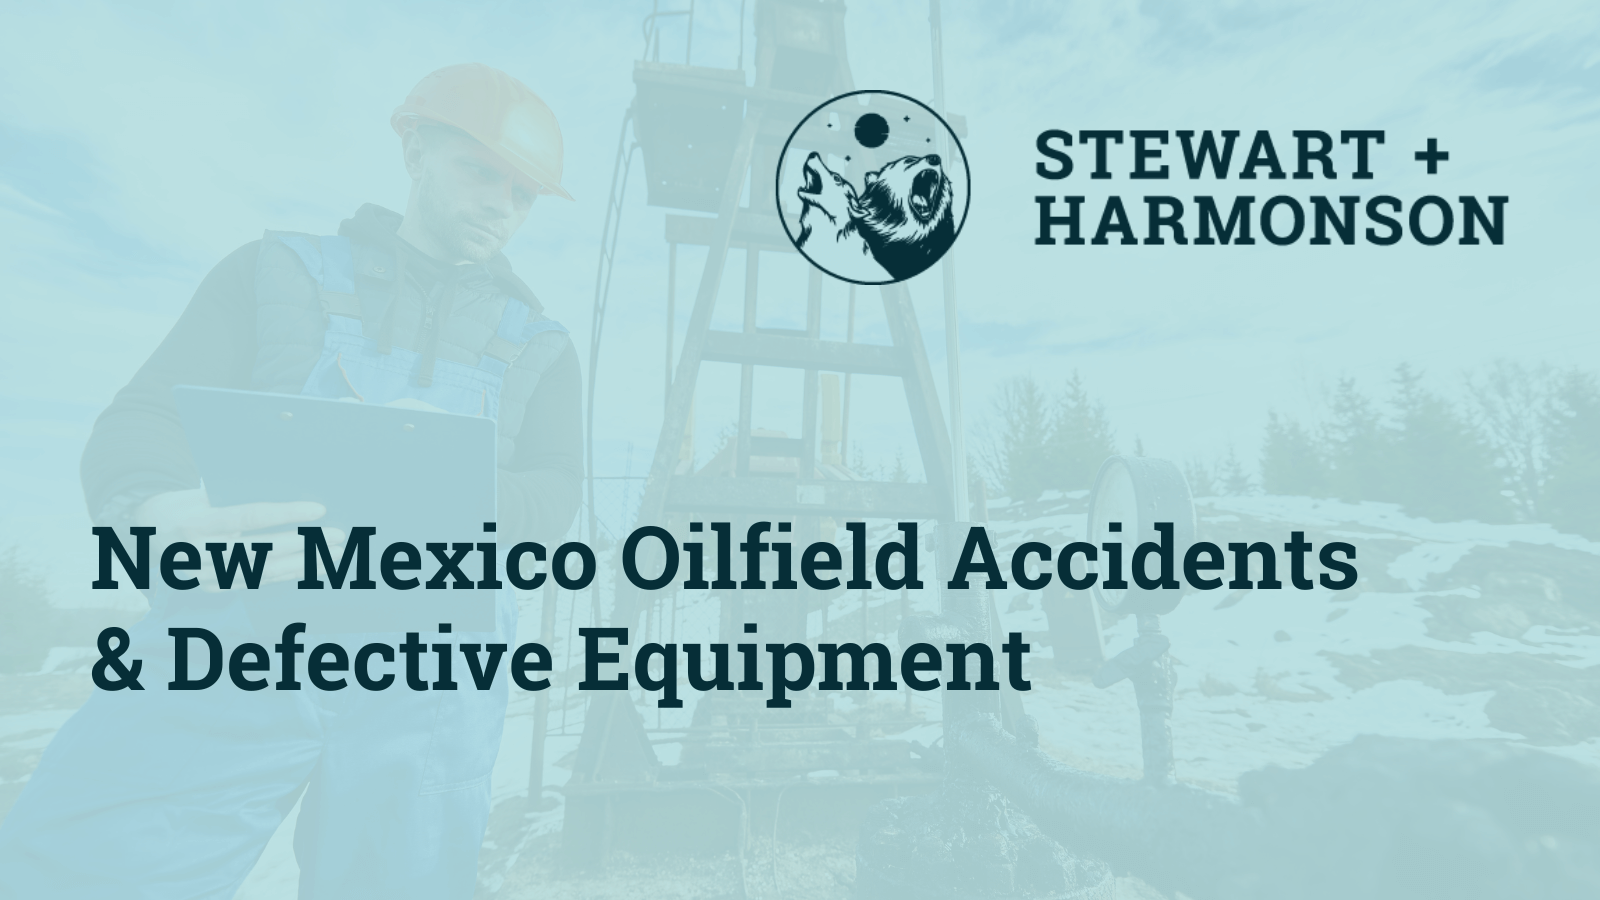 New Mexico Oilfield Accidents & Defective Equipment - Stewart Harmonson Law Firm - New Mexico